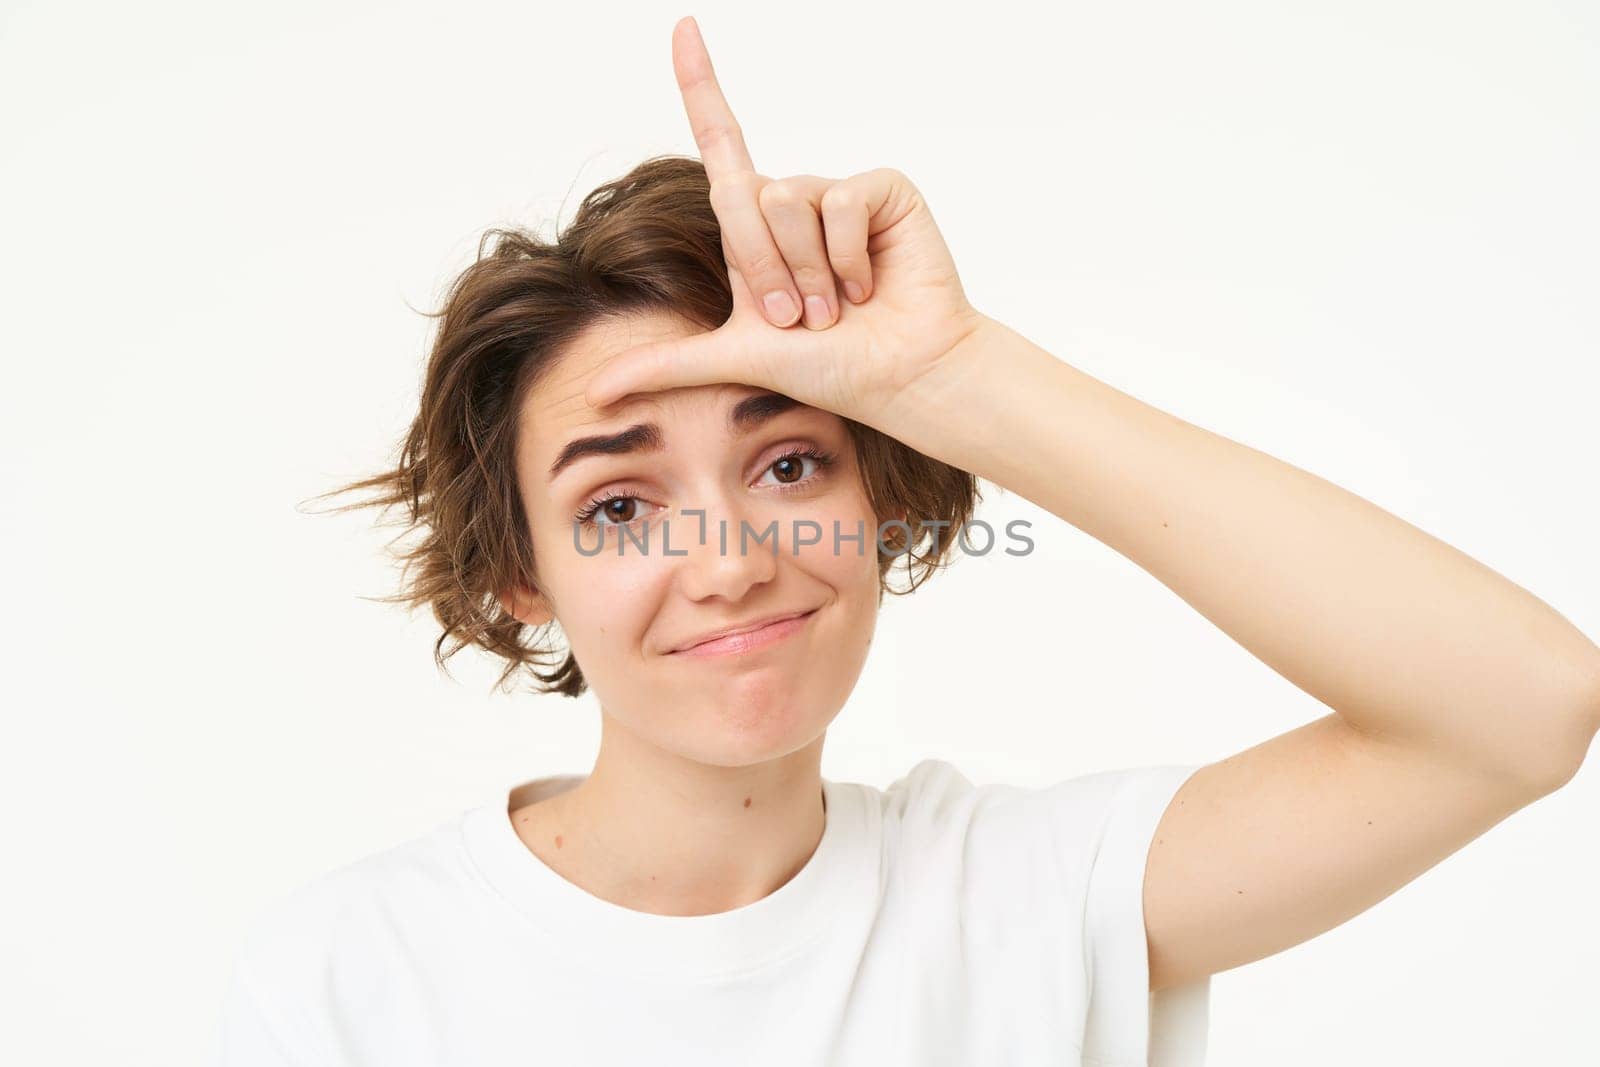 Close up of woman shows loser gesture, l letter on forehead and smiling, mocking, makes fun of someone, standing over white background.